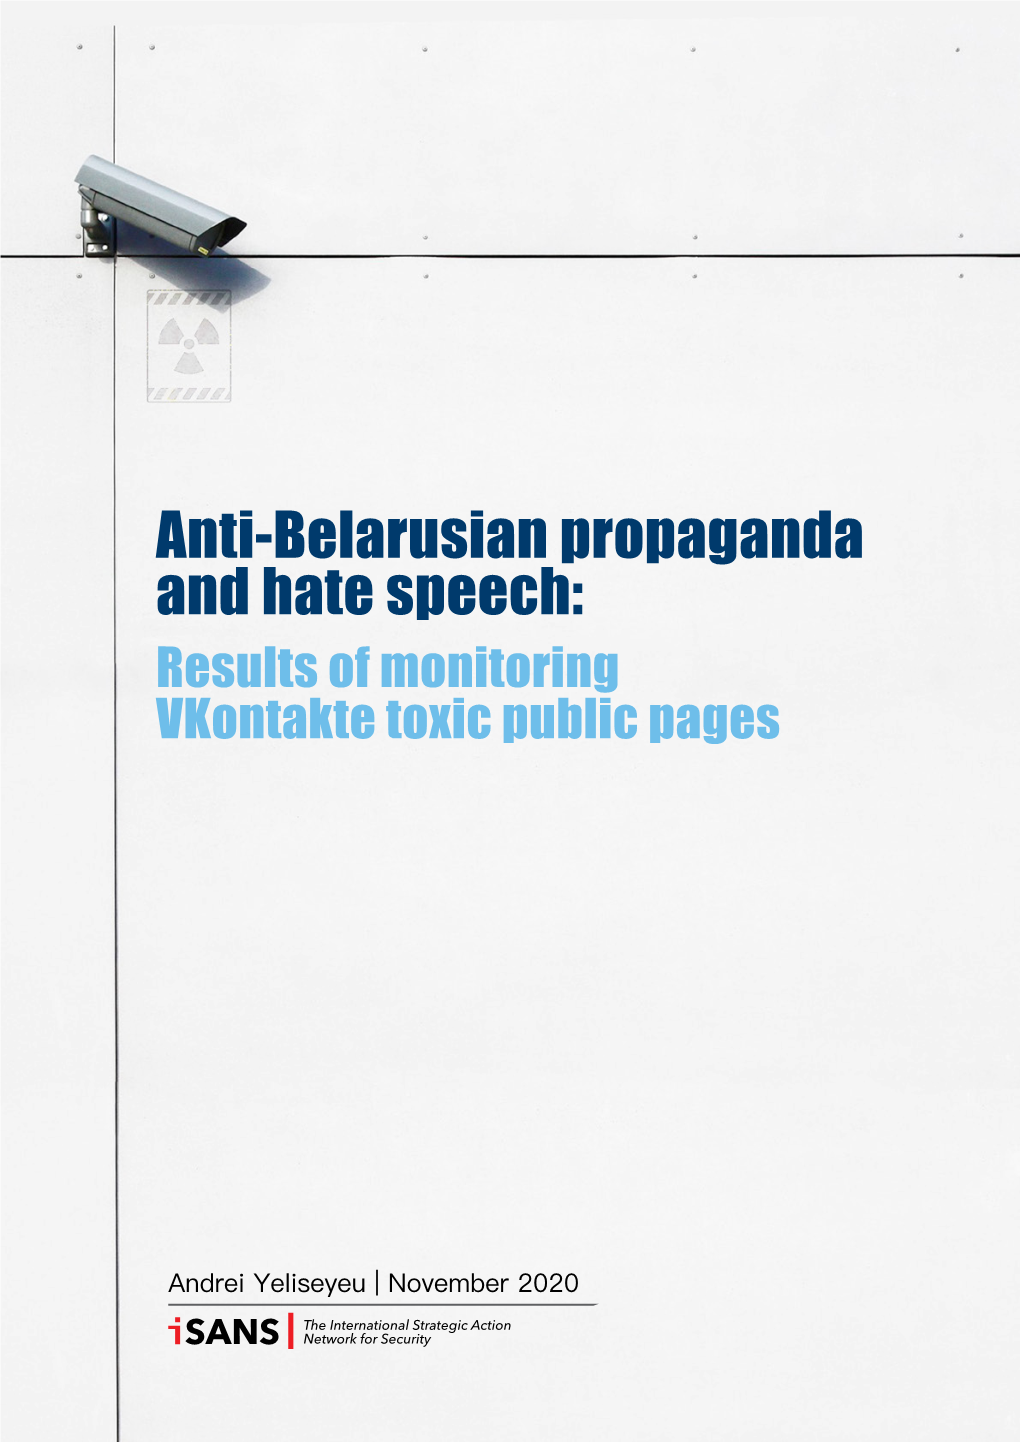 Anti-Belarusian Propaganda and Hate Speech: Results of Monitoring Vkontakte Toxic Public Pages